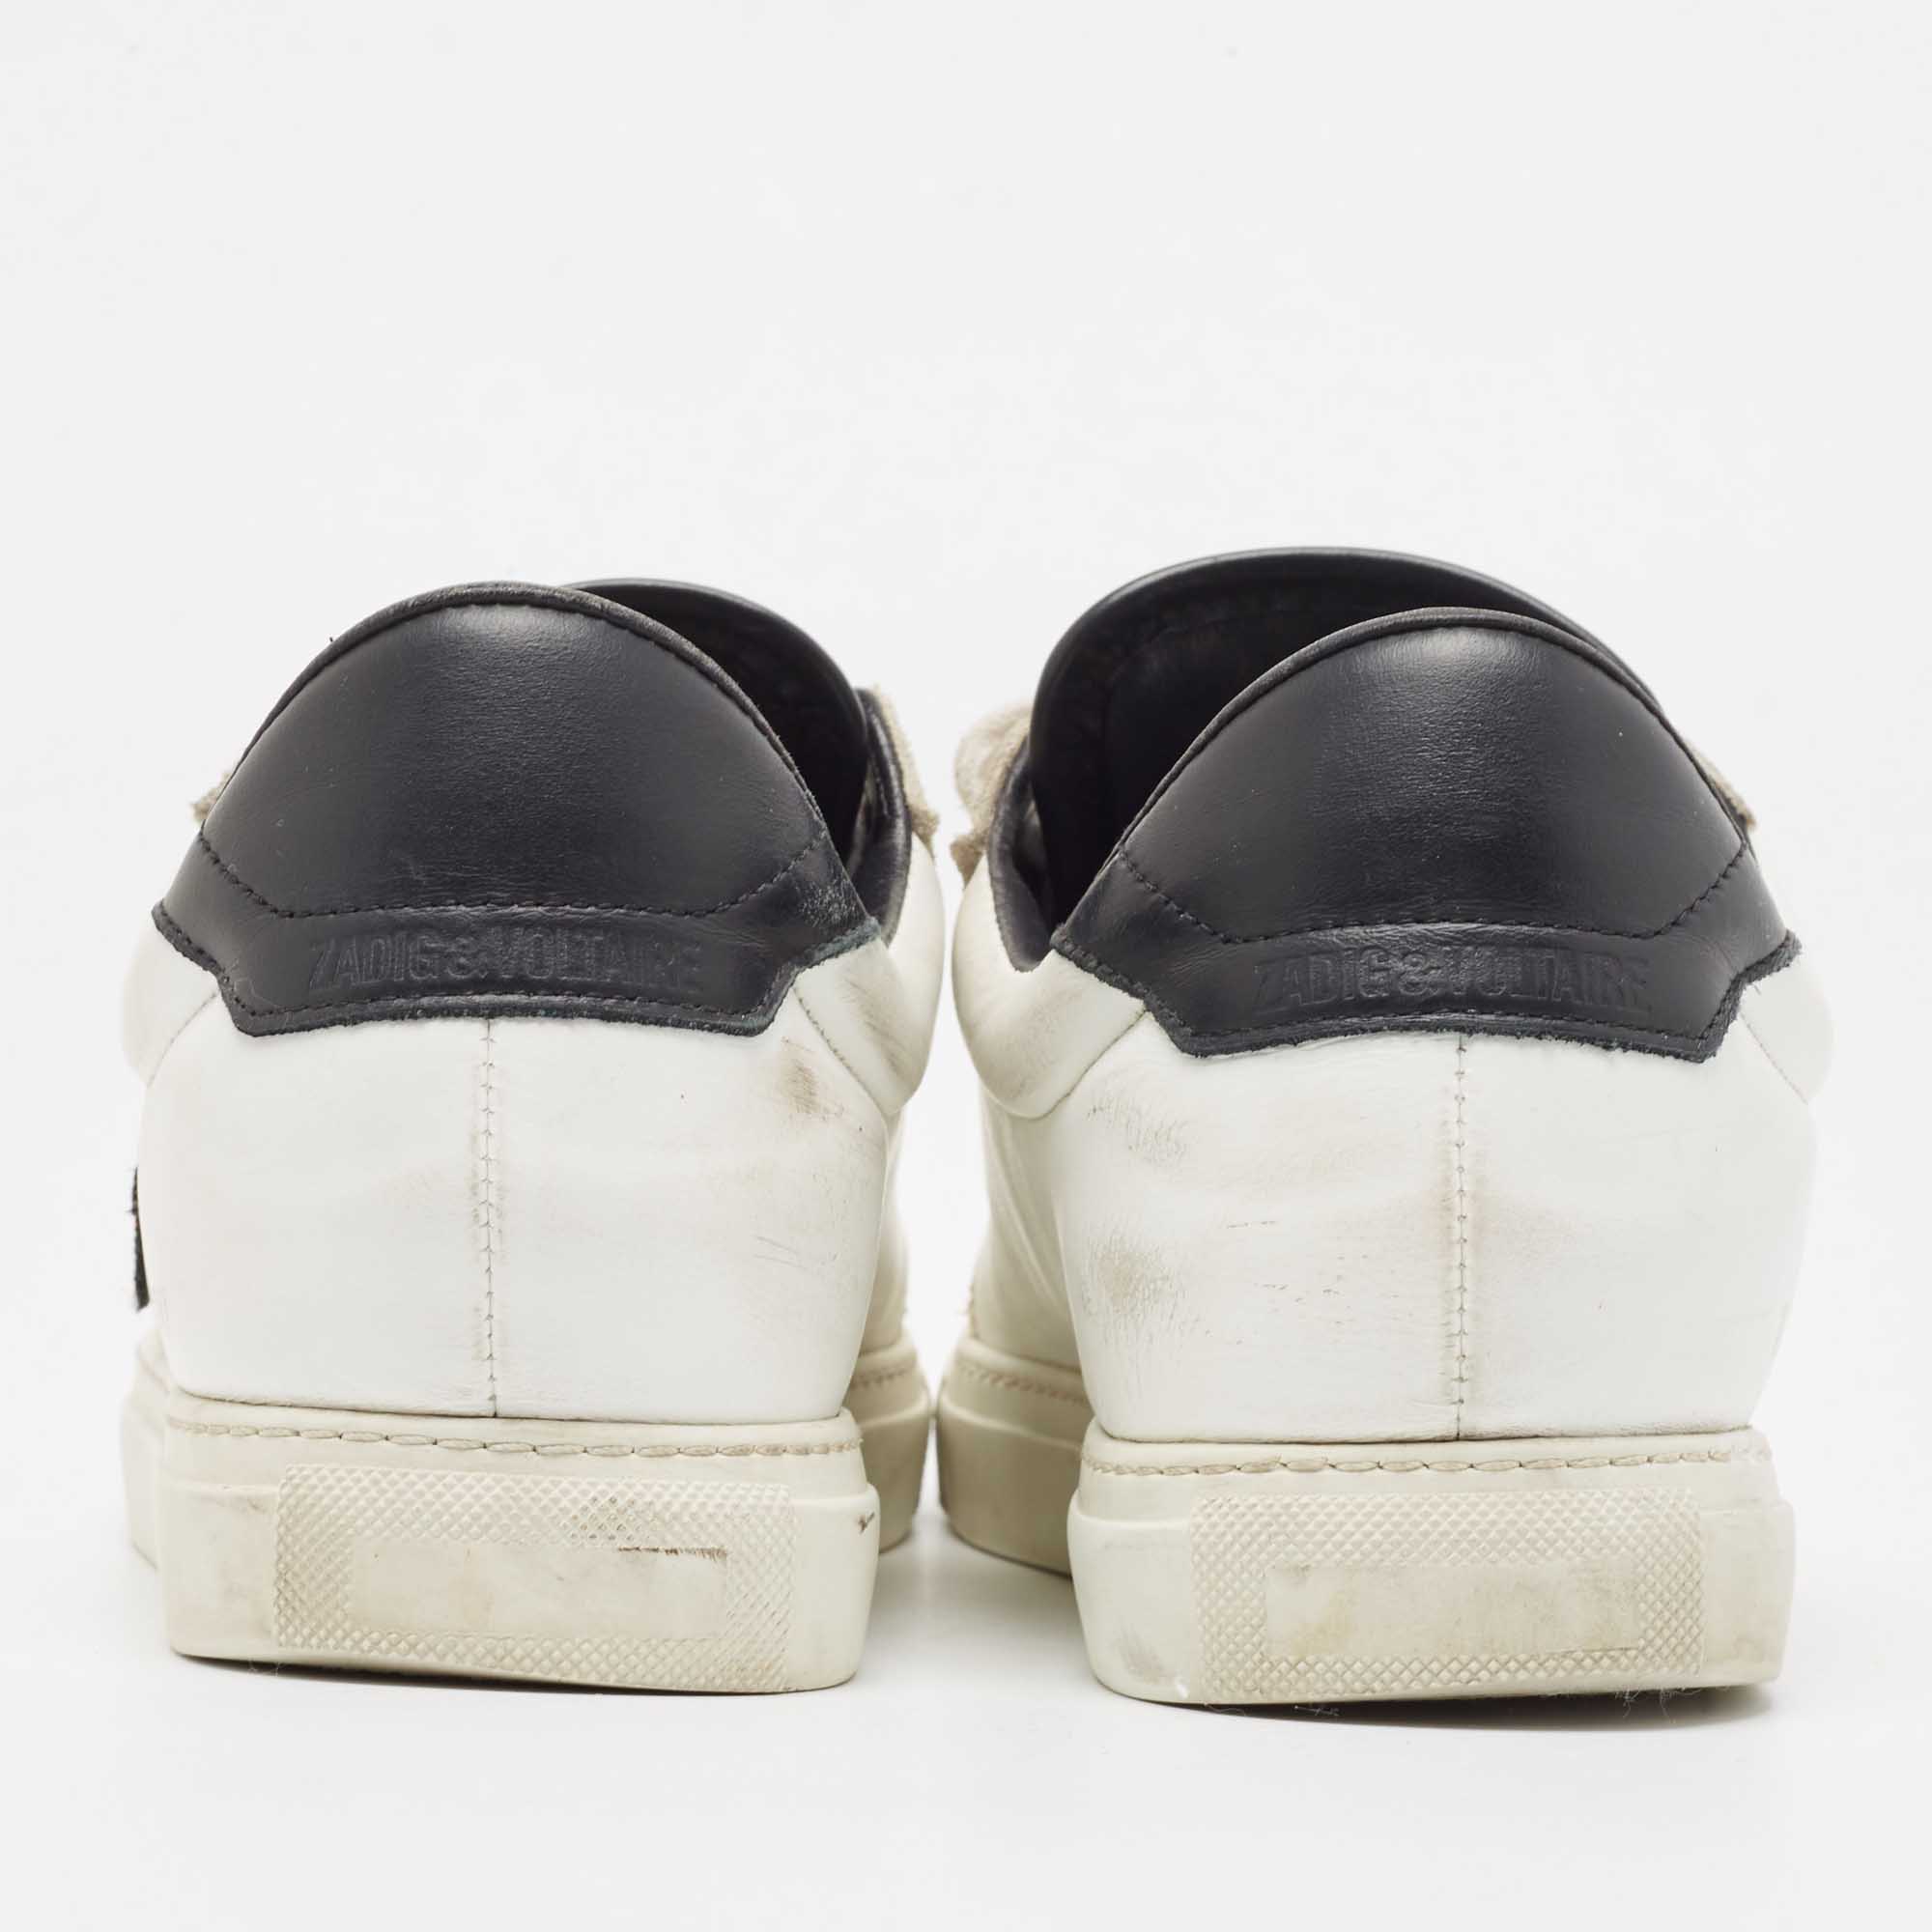 Zadig & Voltaire White Low Top Sneakers Size 38